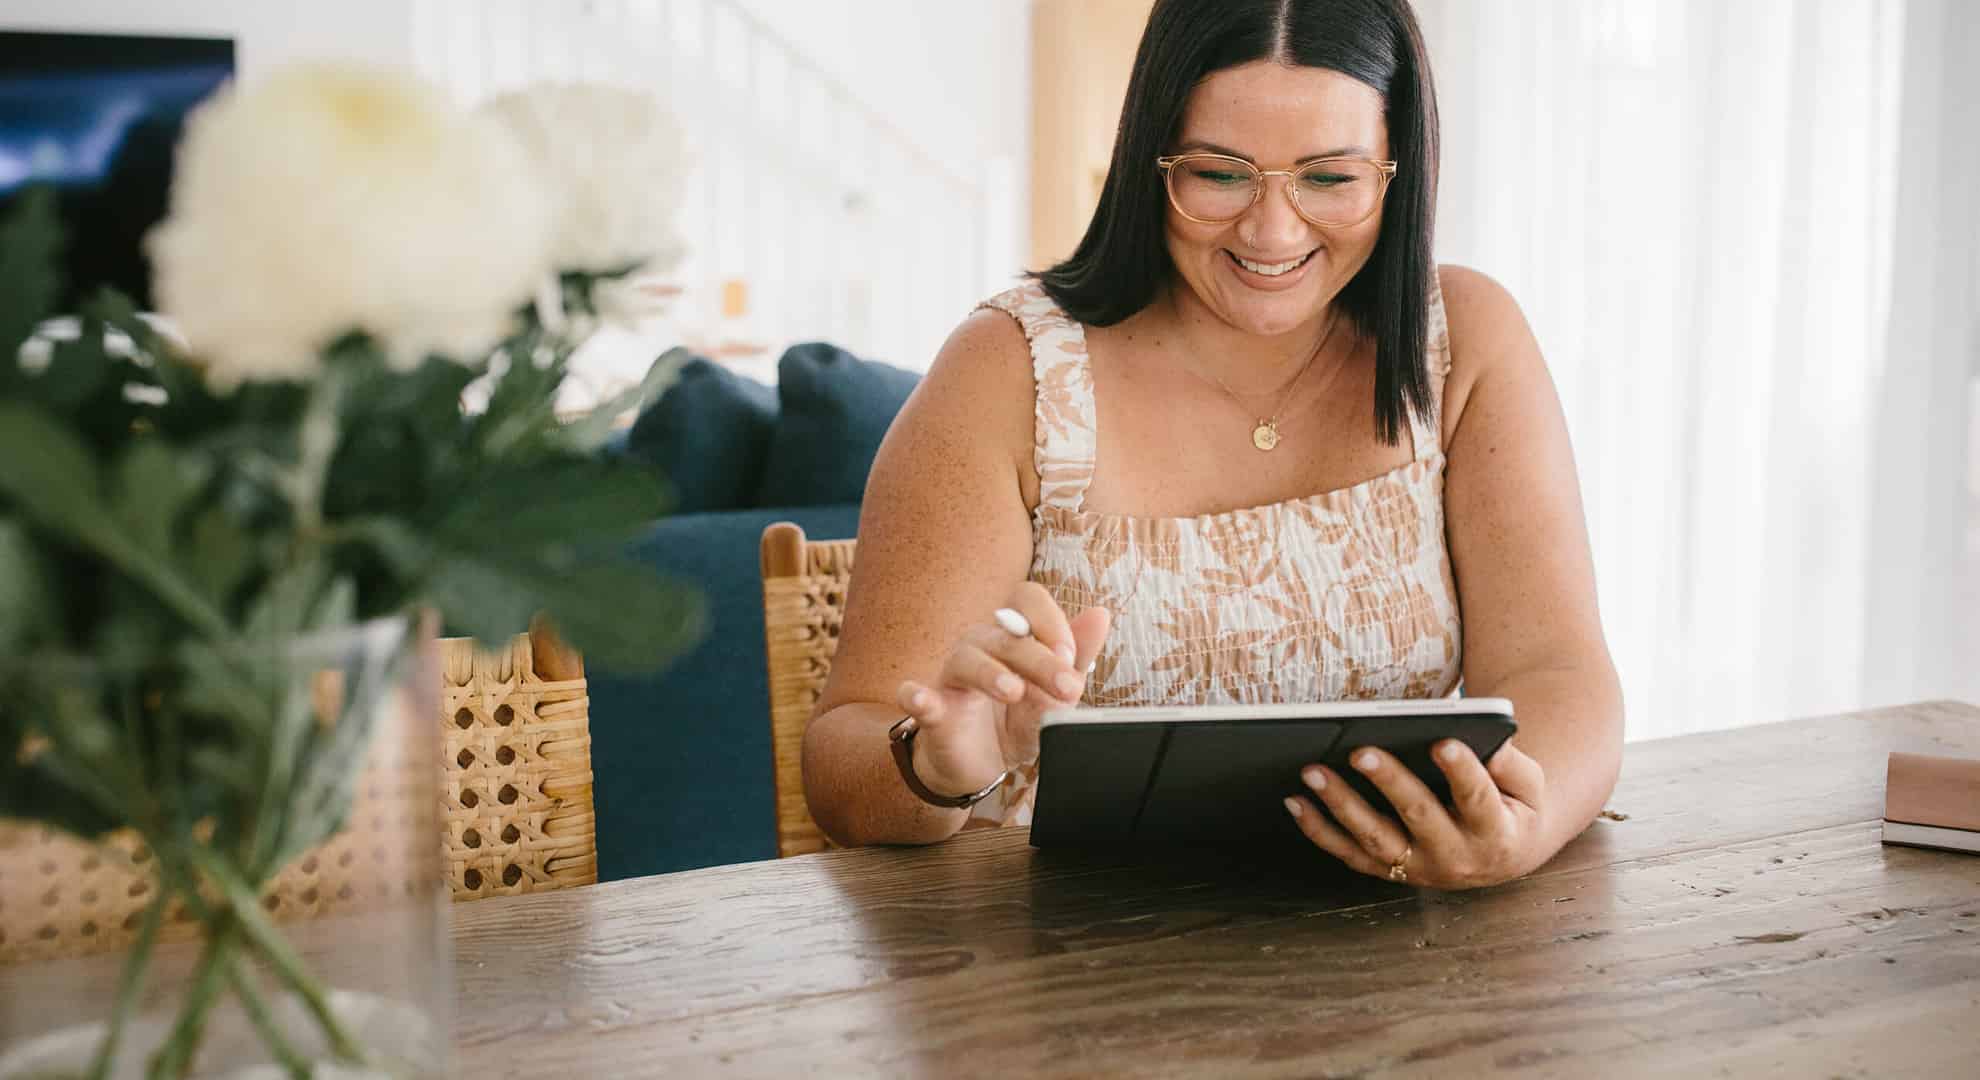 A woman at a table utilizing a tablet for WordPress development purposes.